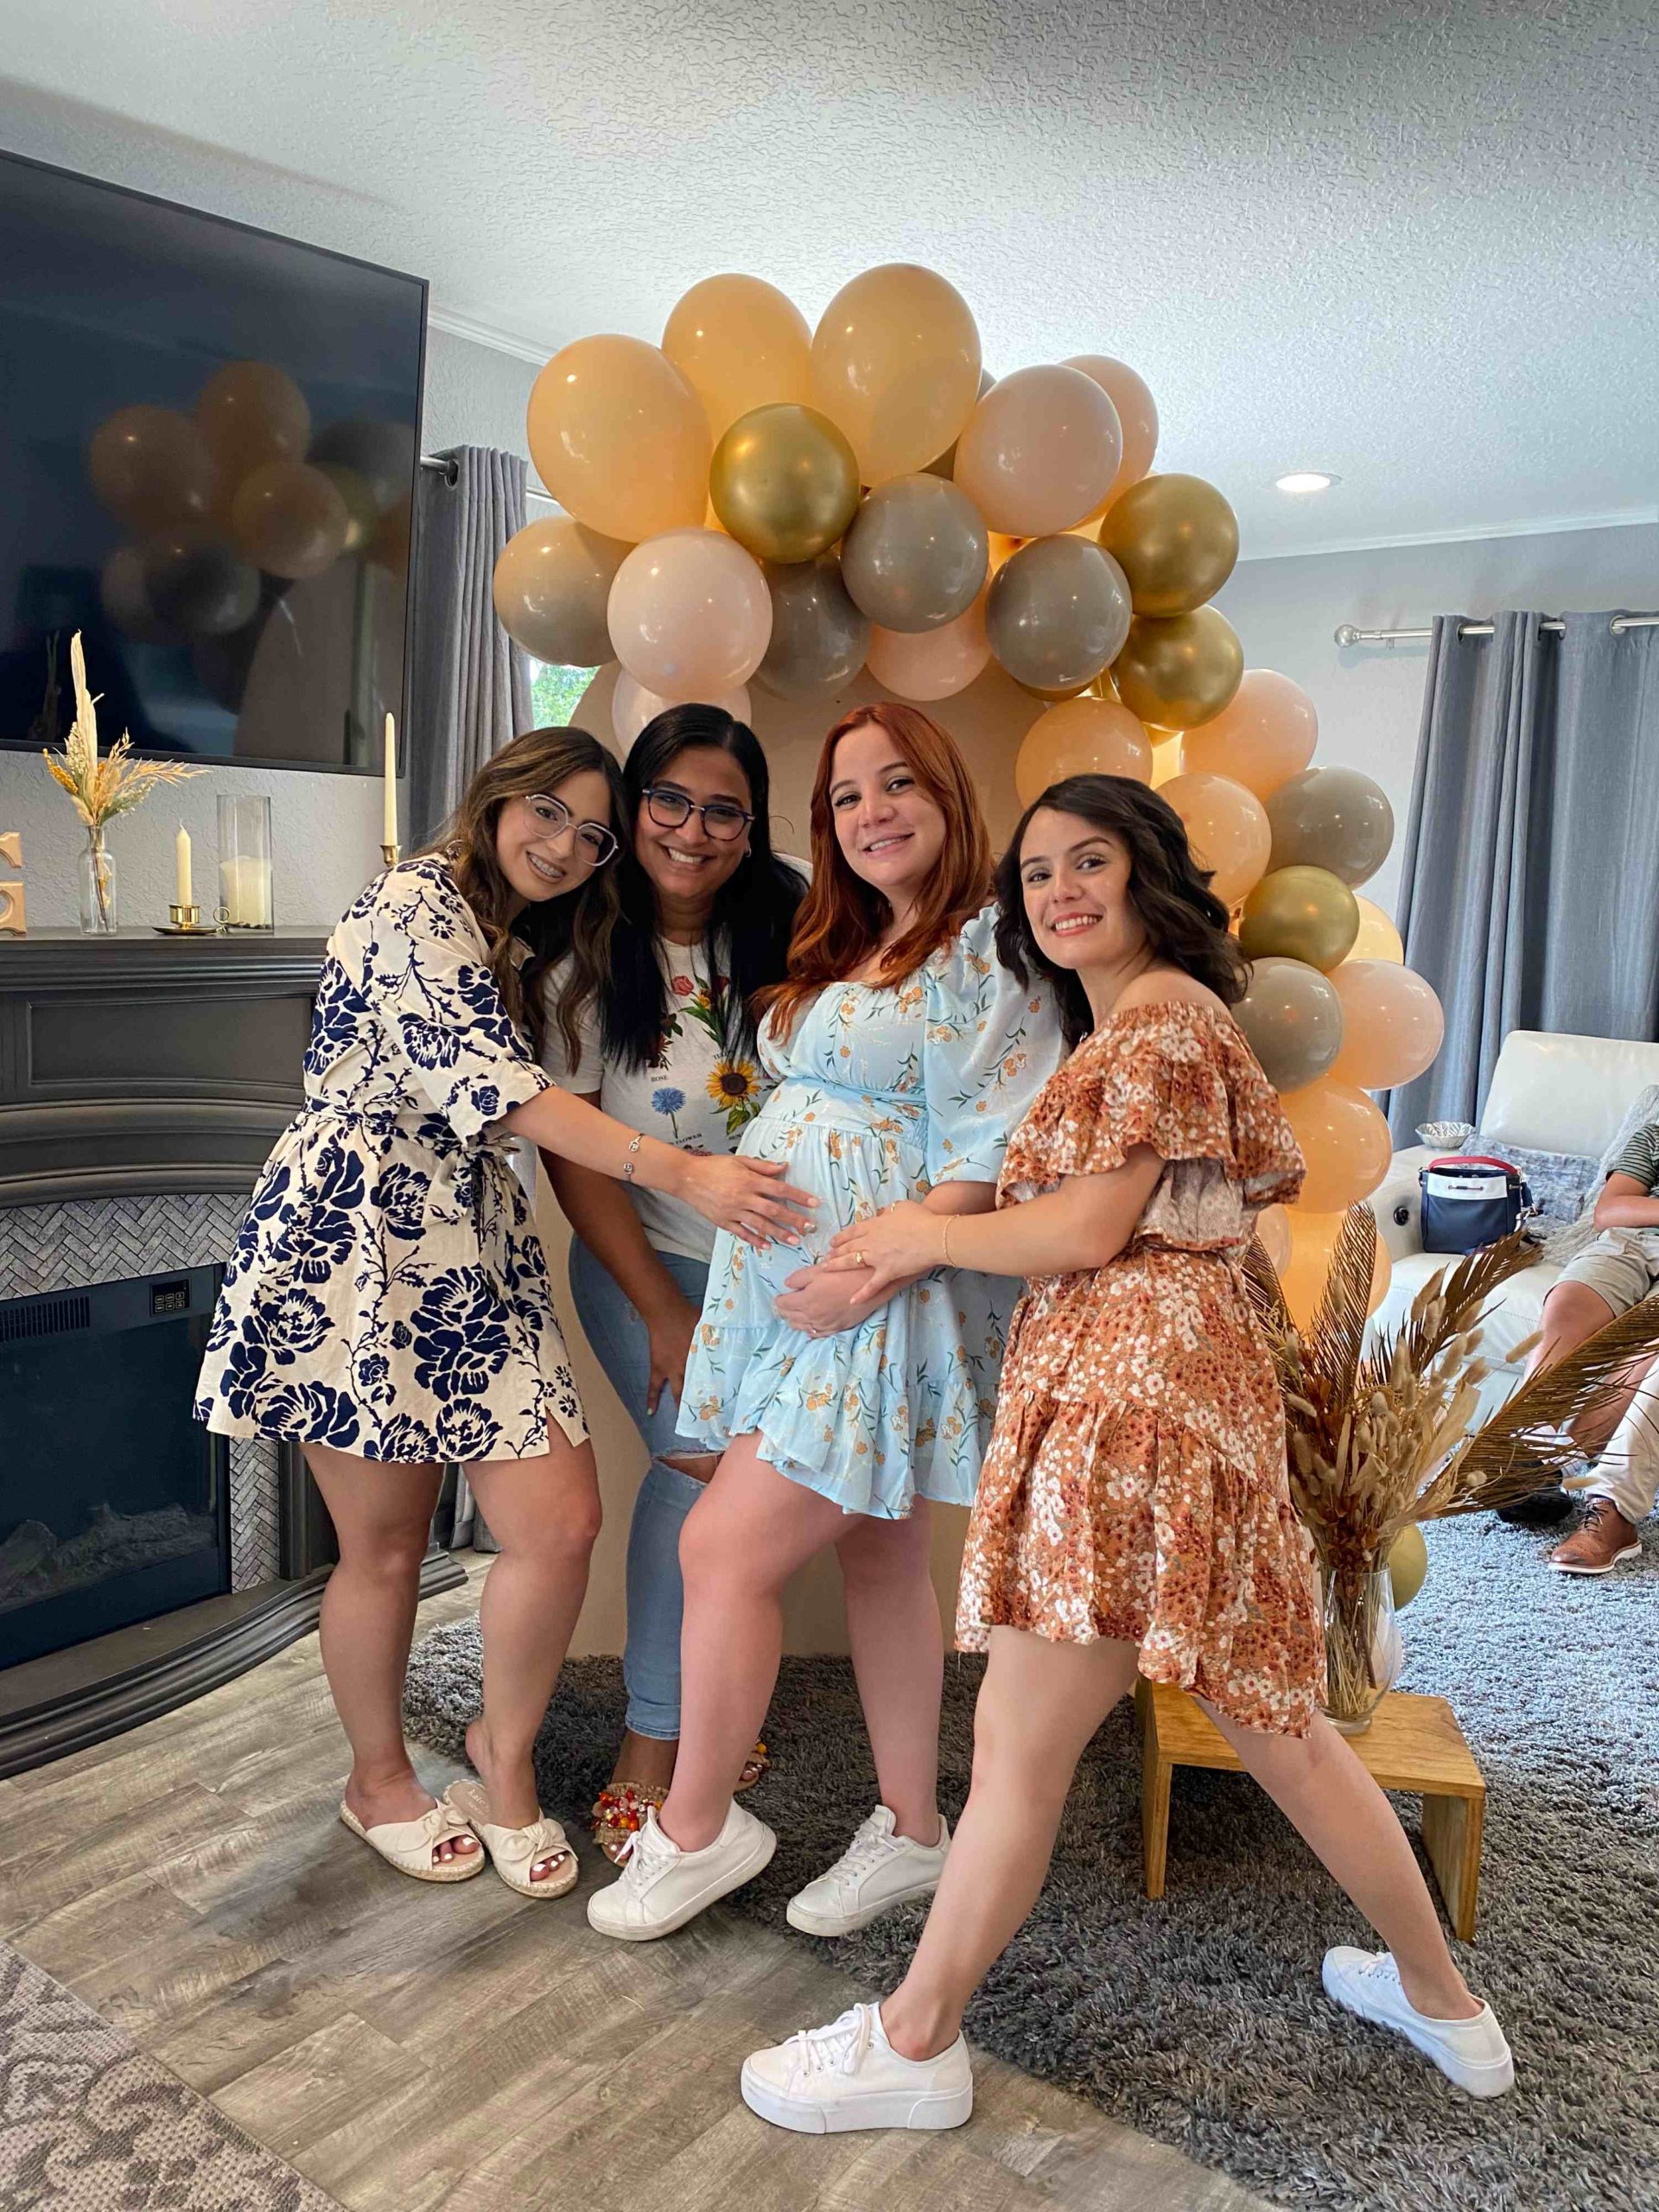 Aneila and her closest cousins Valeria, Leslie, and Vanessa, who she calls her sisters, celebrating Leslie’s miracle baby.